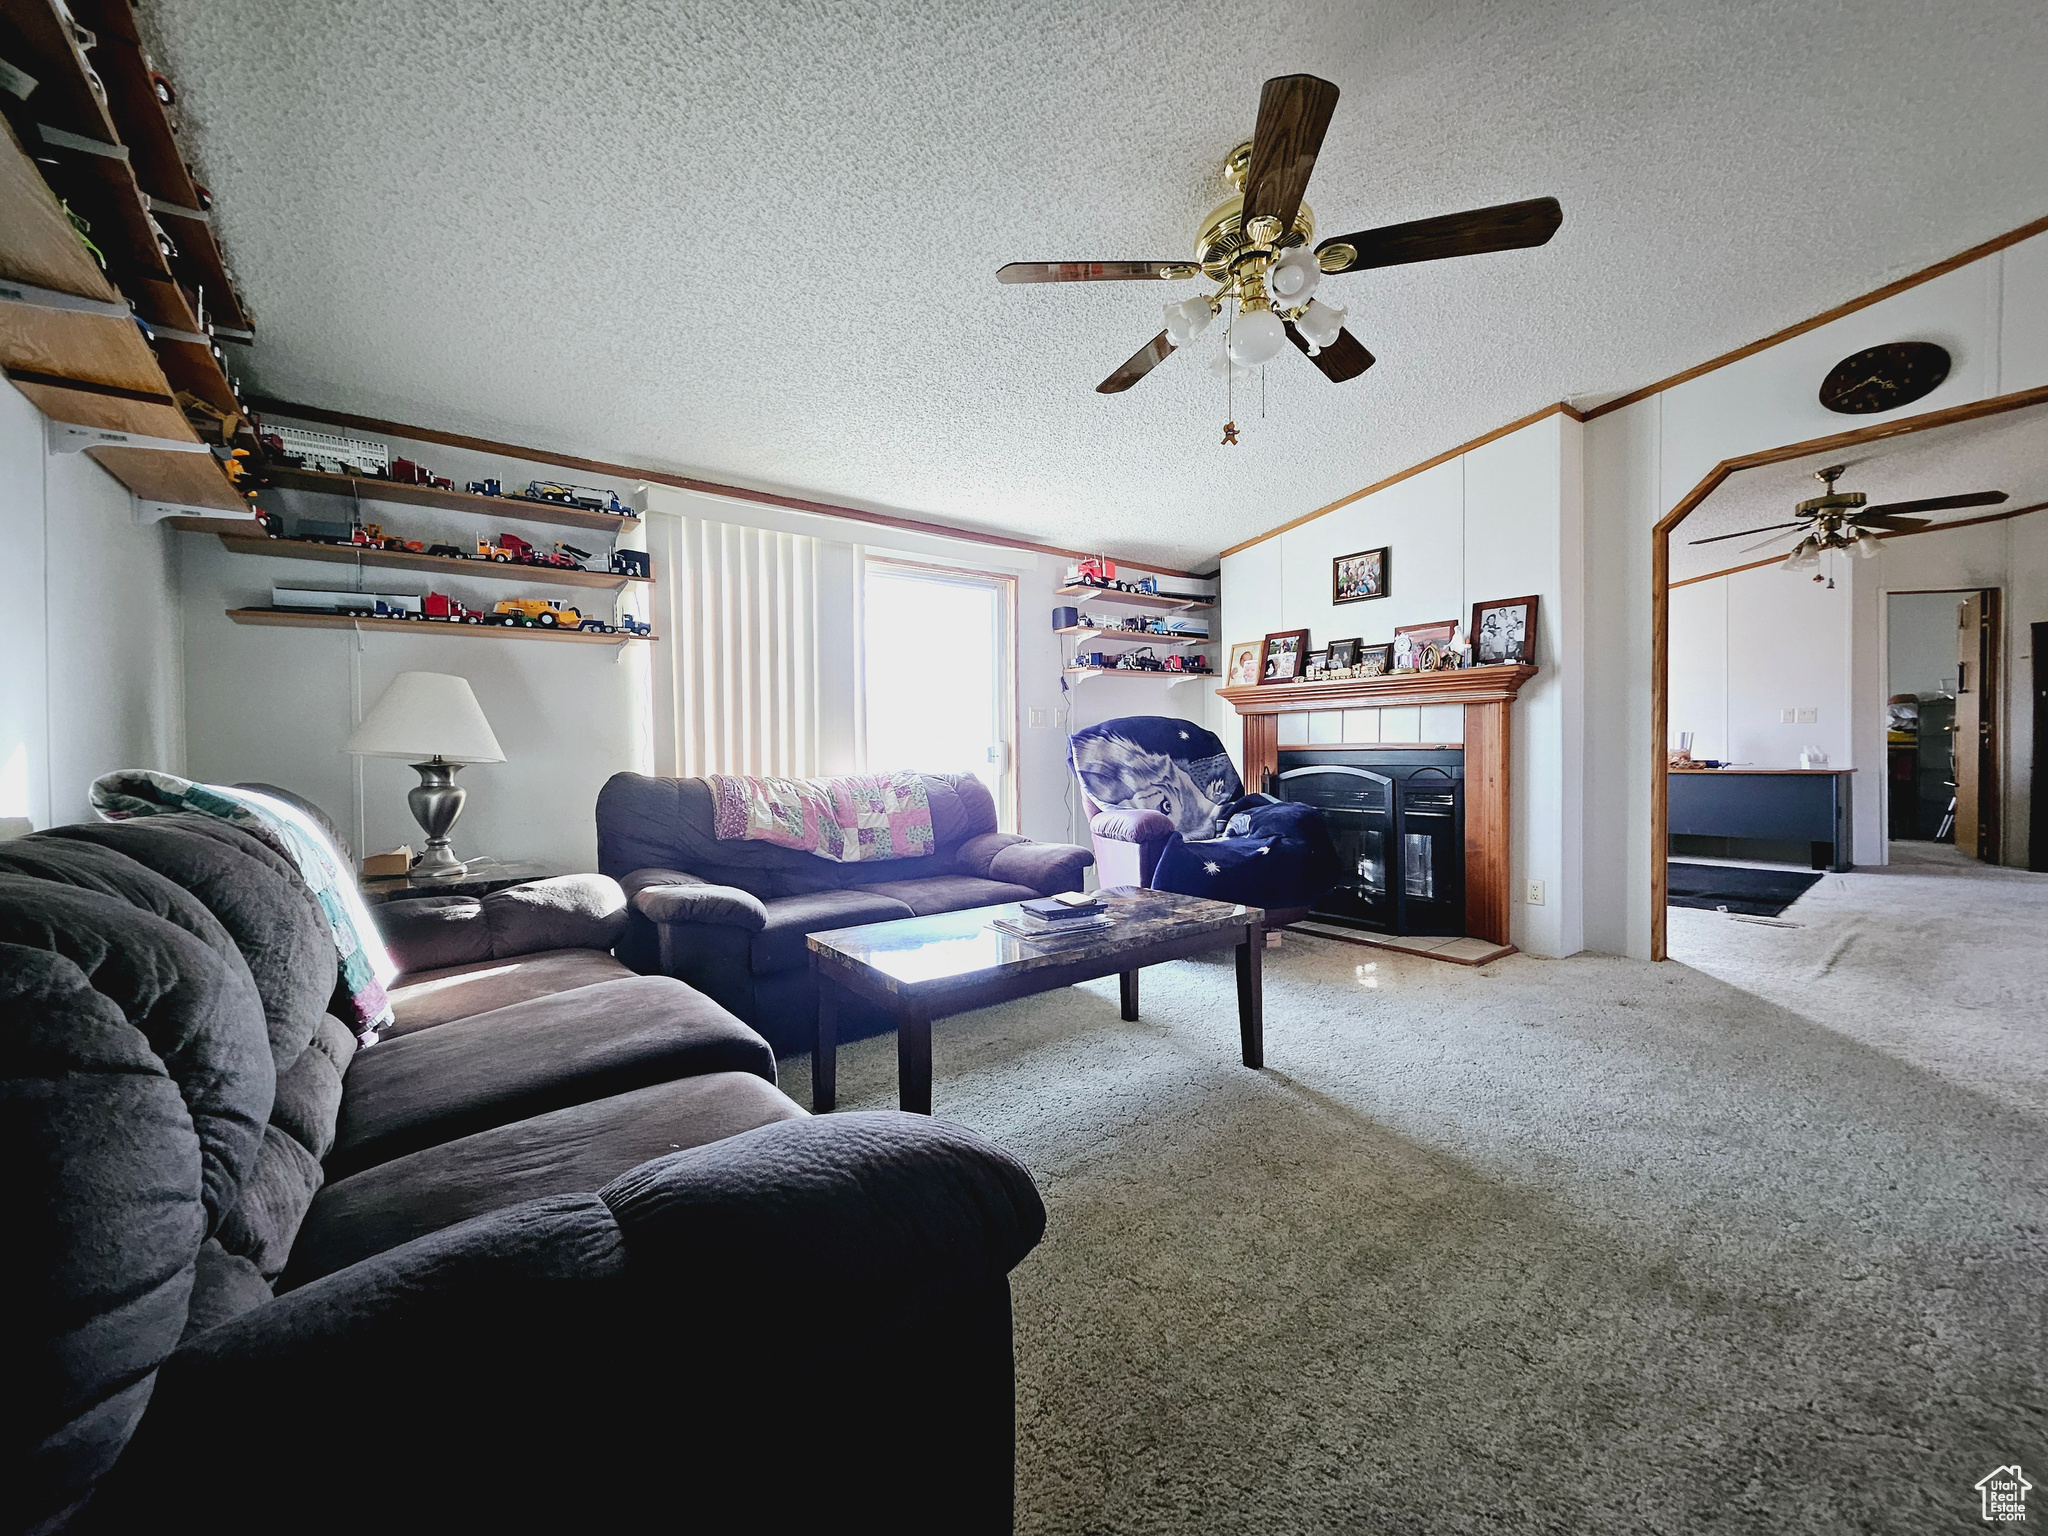 Living room with carpet flooring, a textured ceiling, ceiling fan, and lofted ceiling